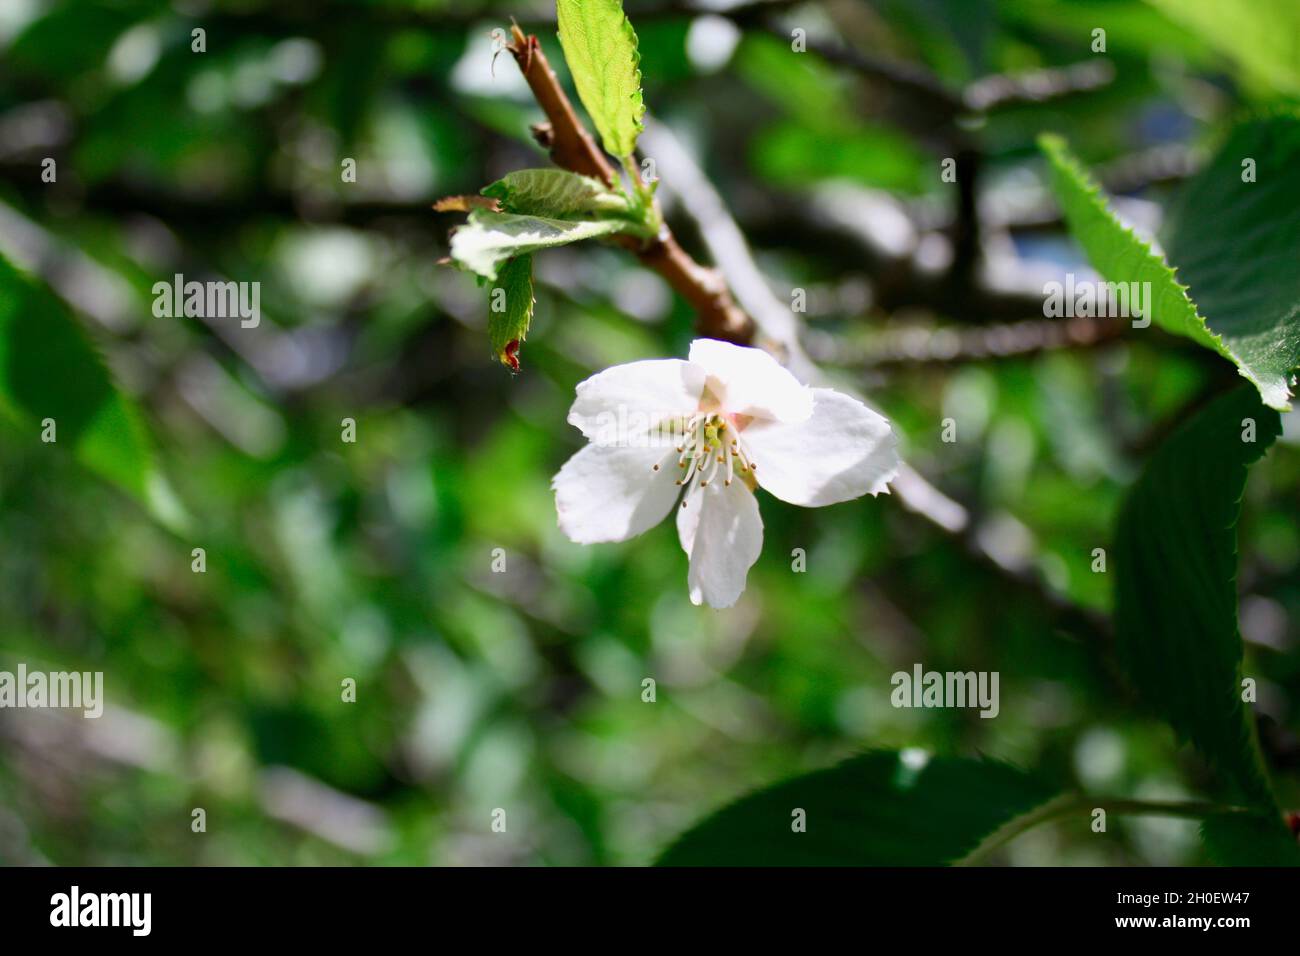 Macro photo of a cherry blossom flower surrounded by greenery. Stock Photo